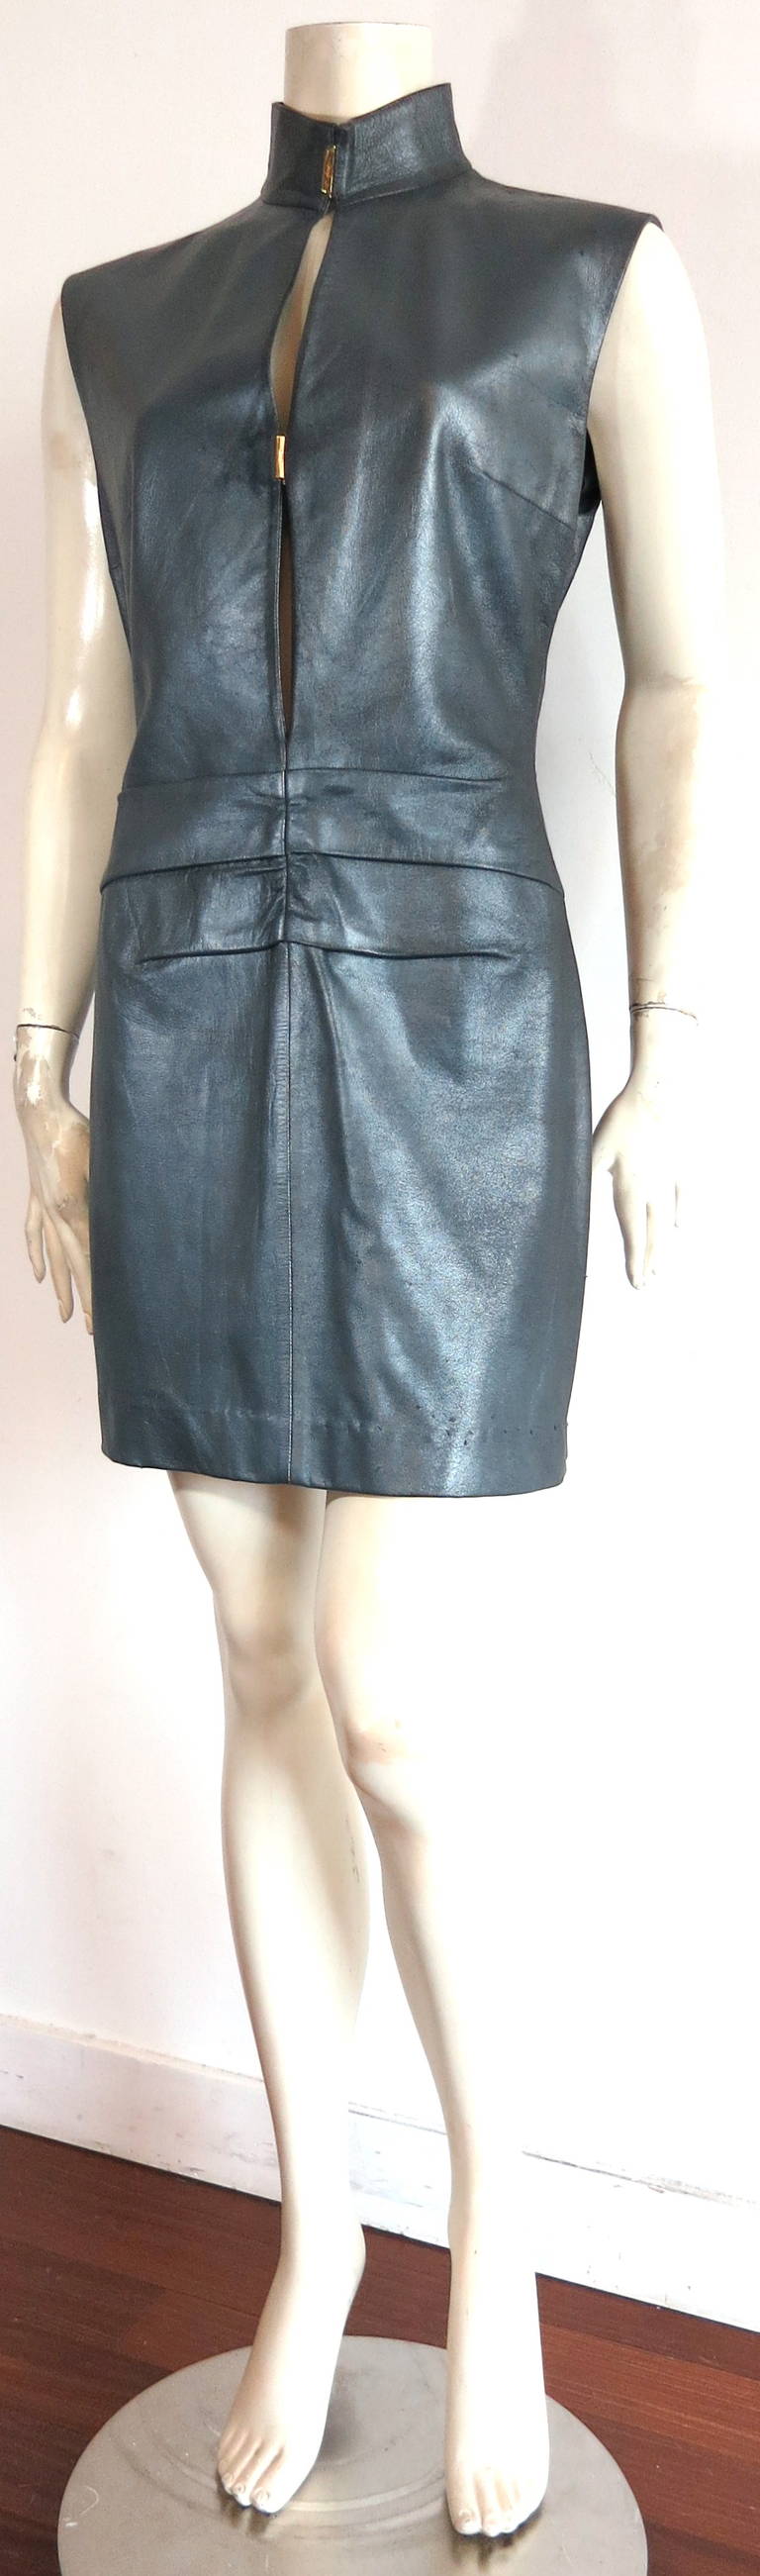 1990s YVES SAINT LAURENT Gunmetal leather dress.

This amazing, all leather dress features a gorgeous gunmetal-metallic, shimmer finish.

Twin, polished gold finished, 'YSL' logo engraved metal closures at center front.

Box pleated